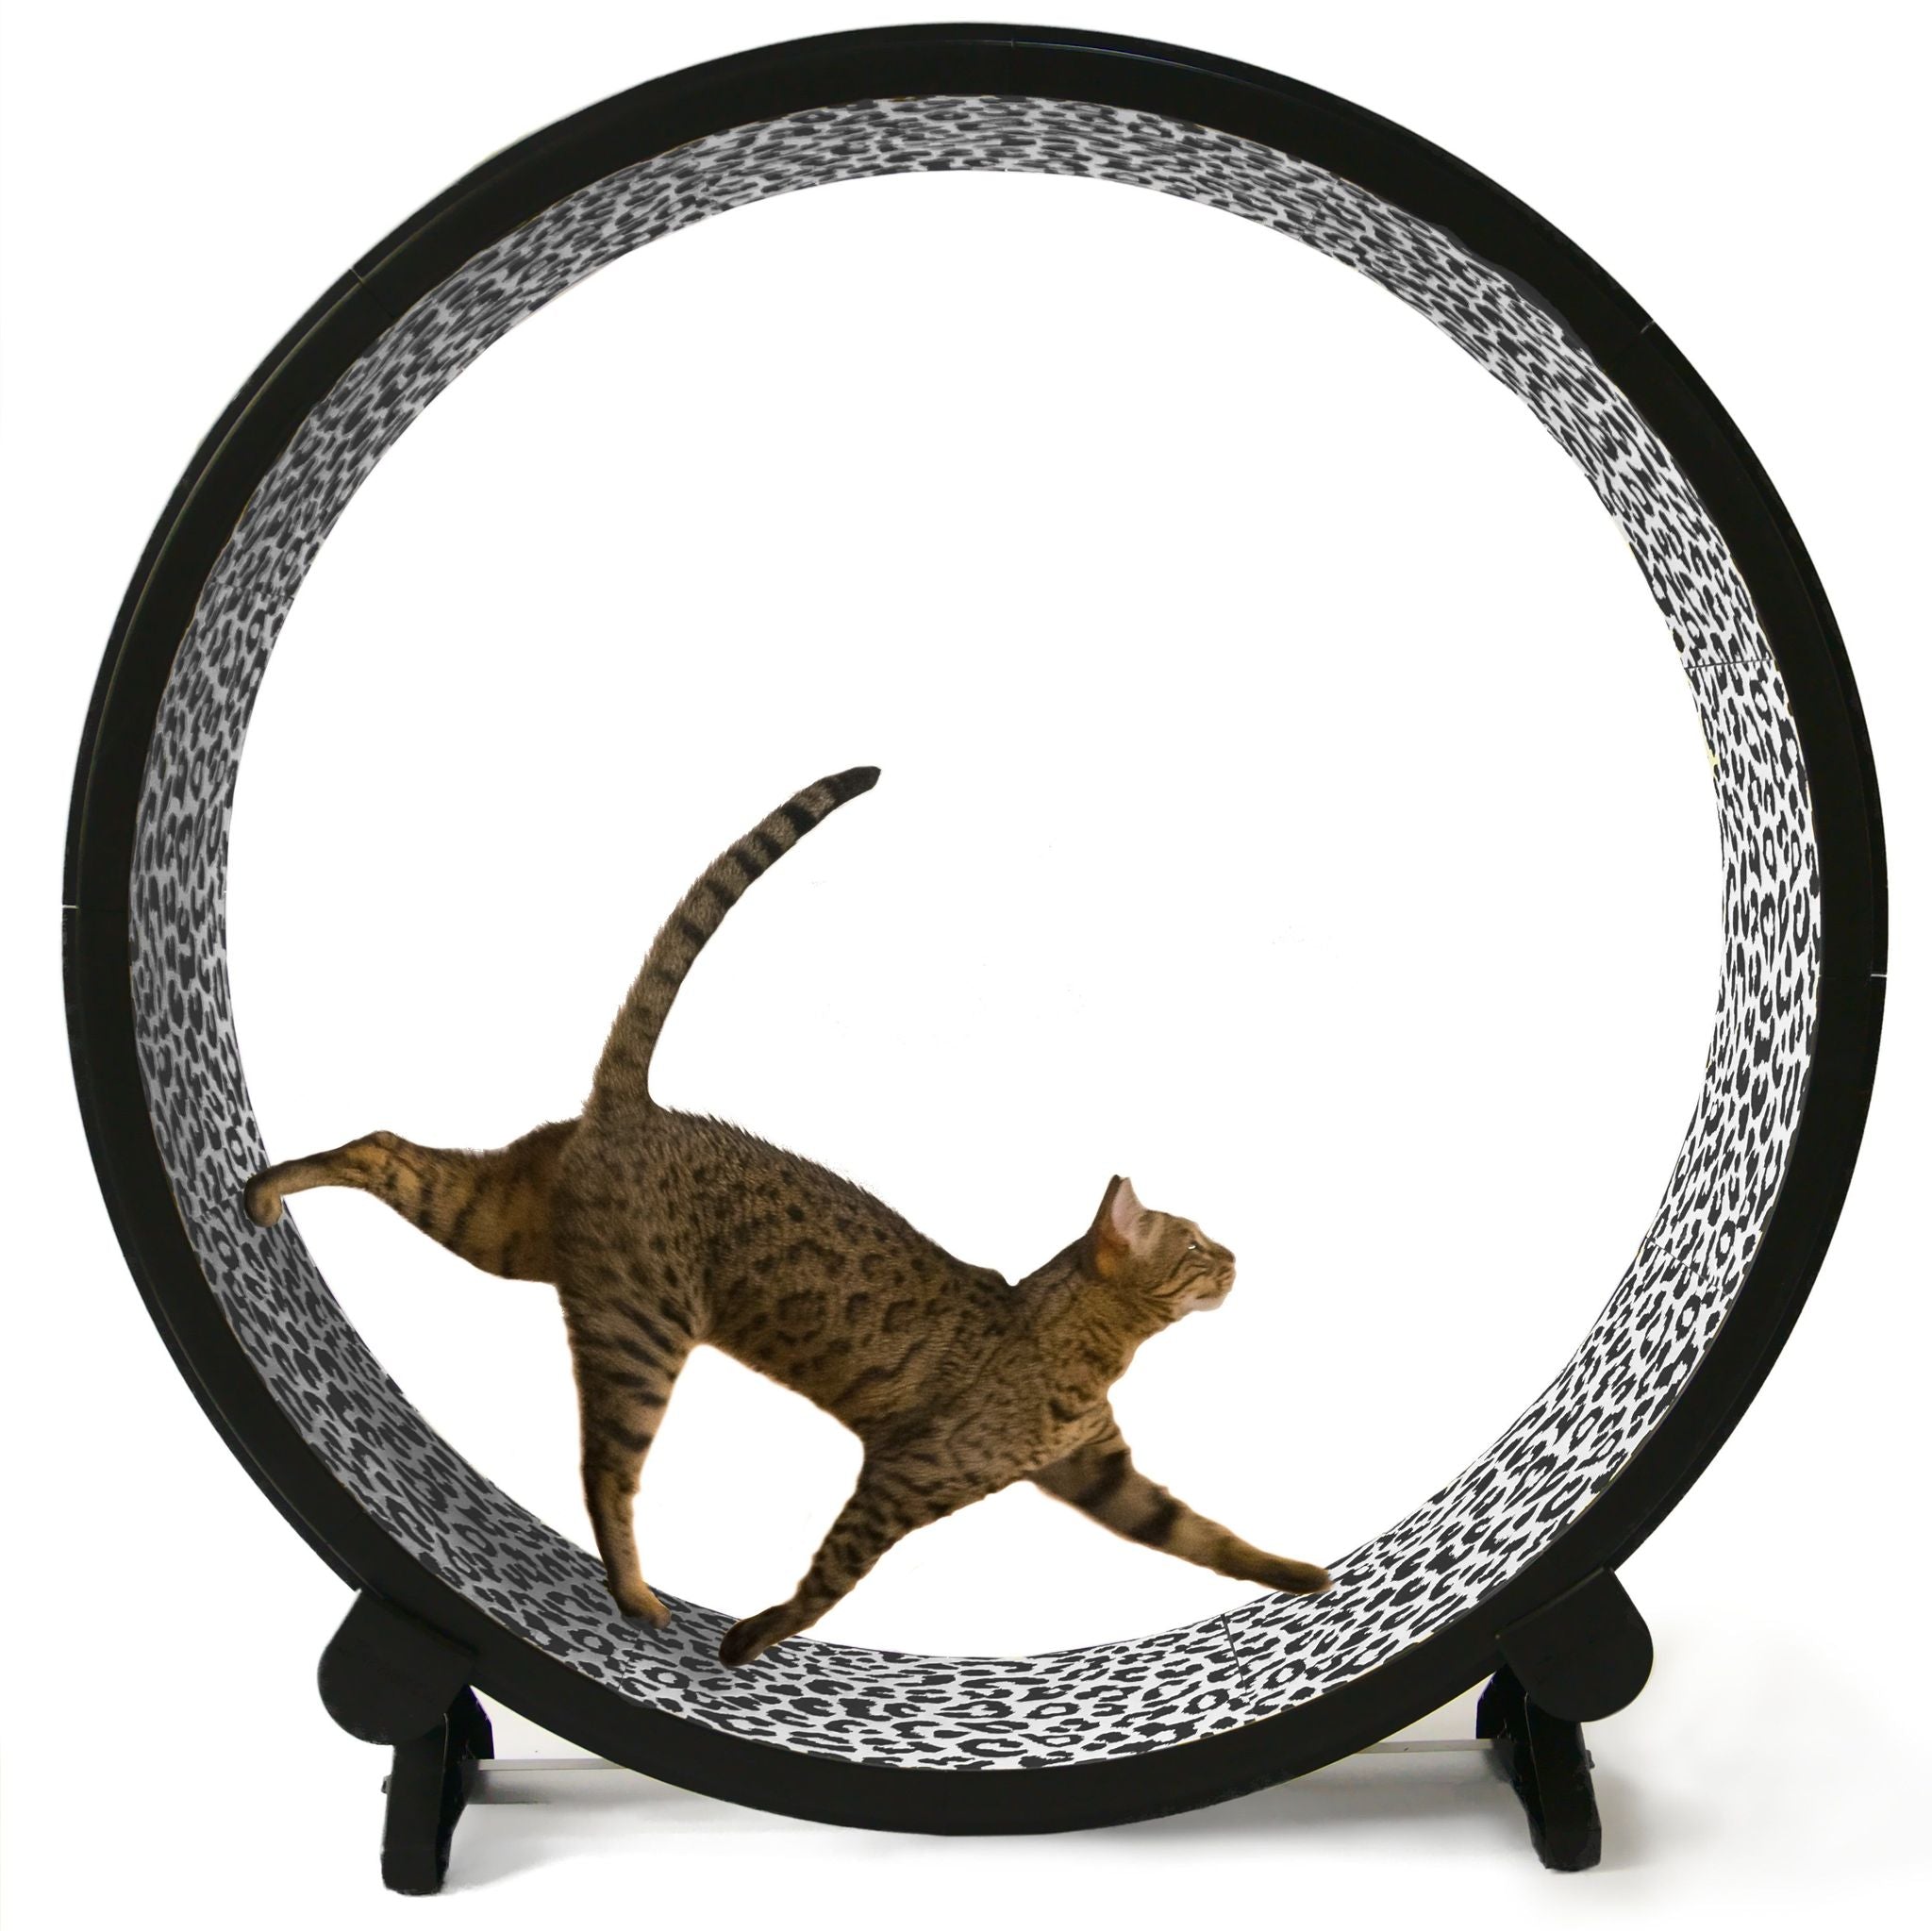 One Fast Cat Wheel Please Note next 